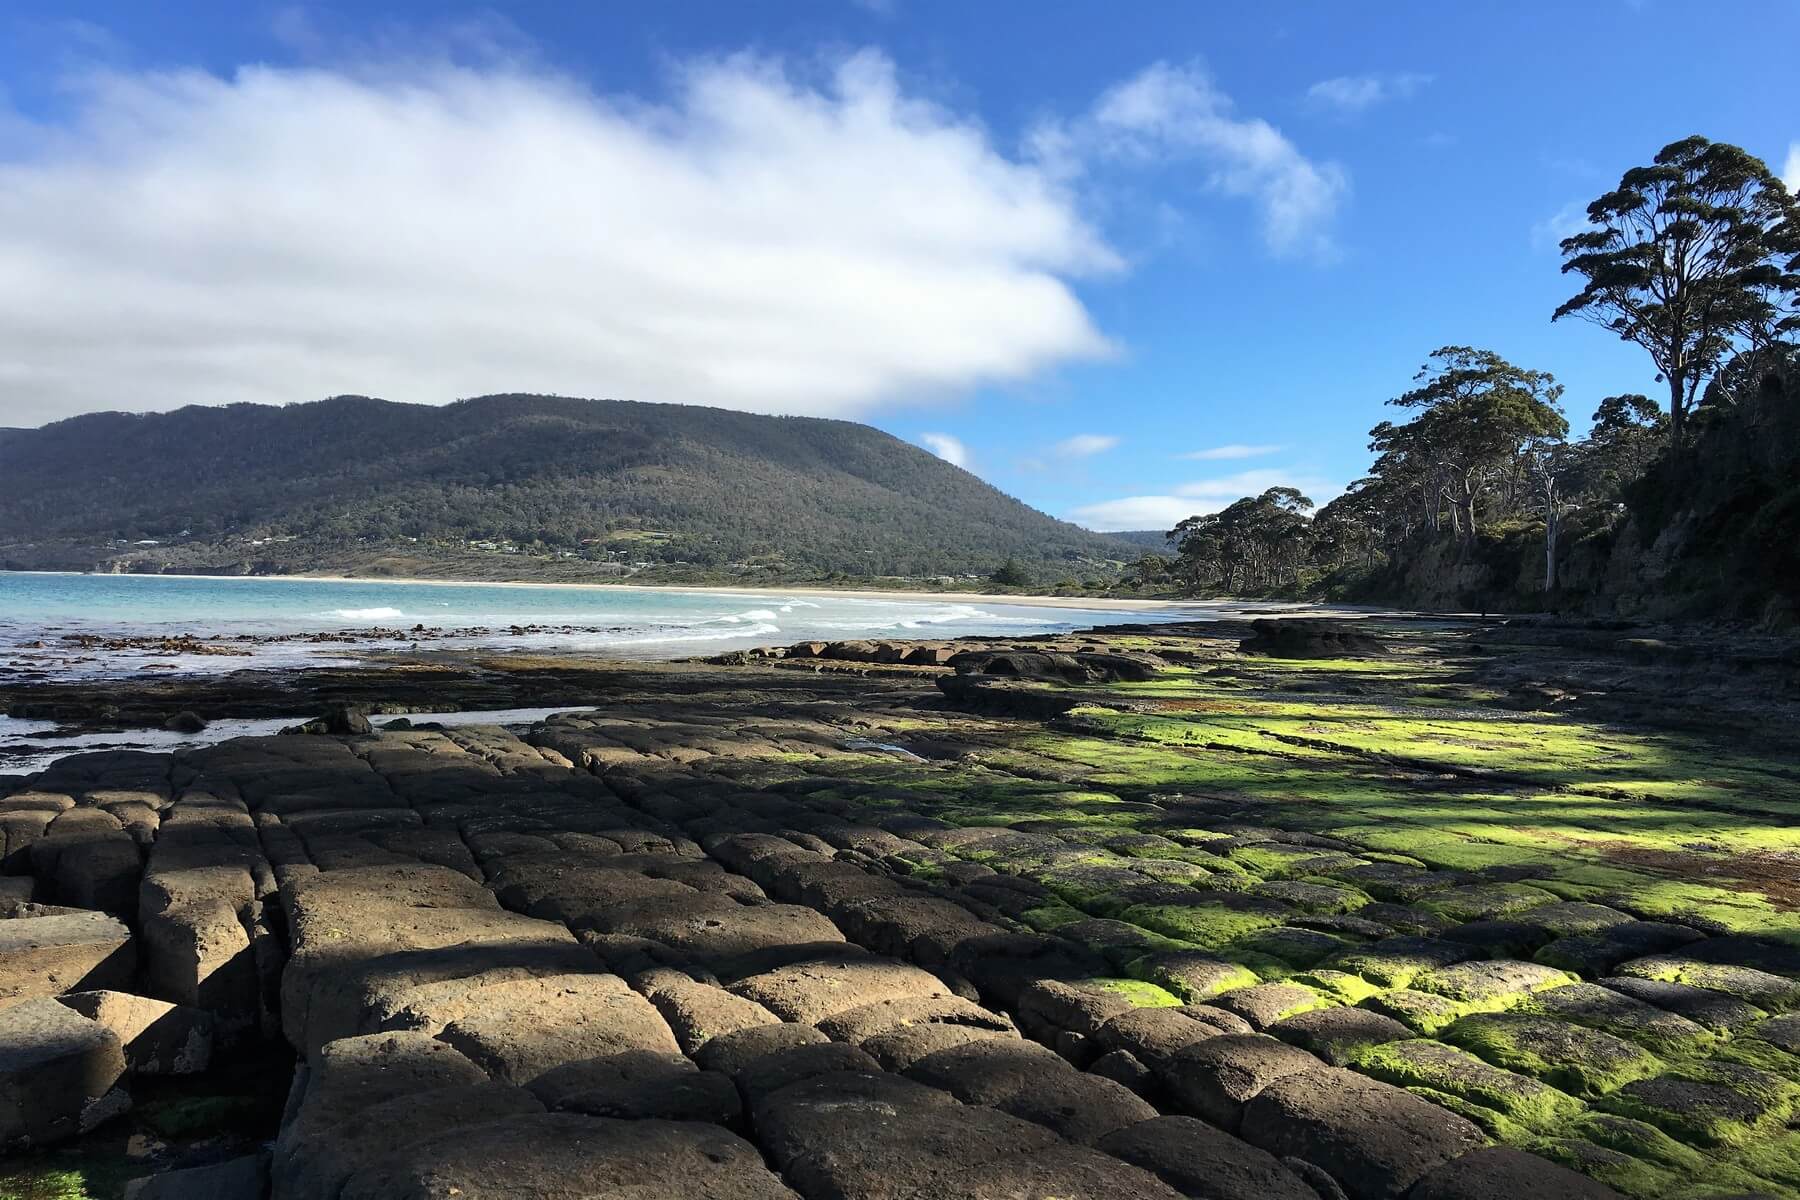 Stunning display of mother natures work with rock formation at the Tessellated Pavement